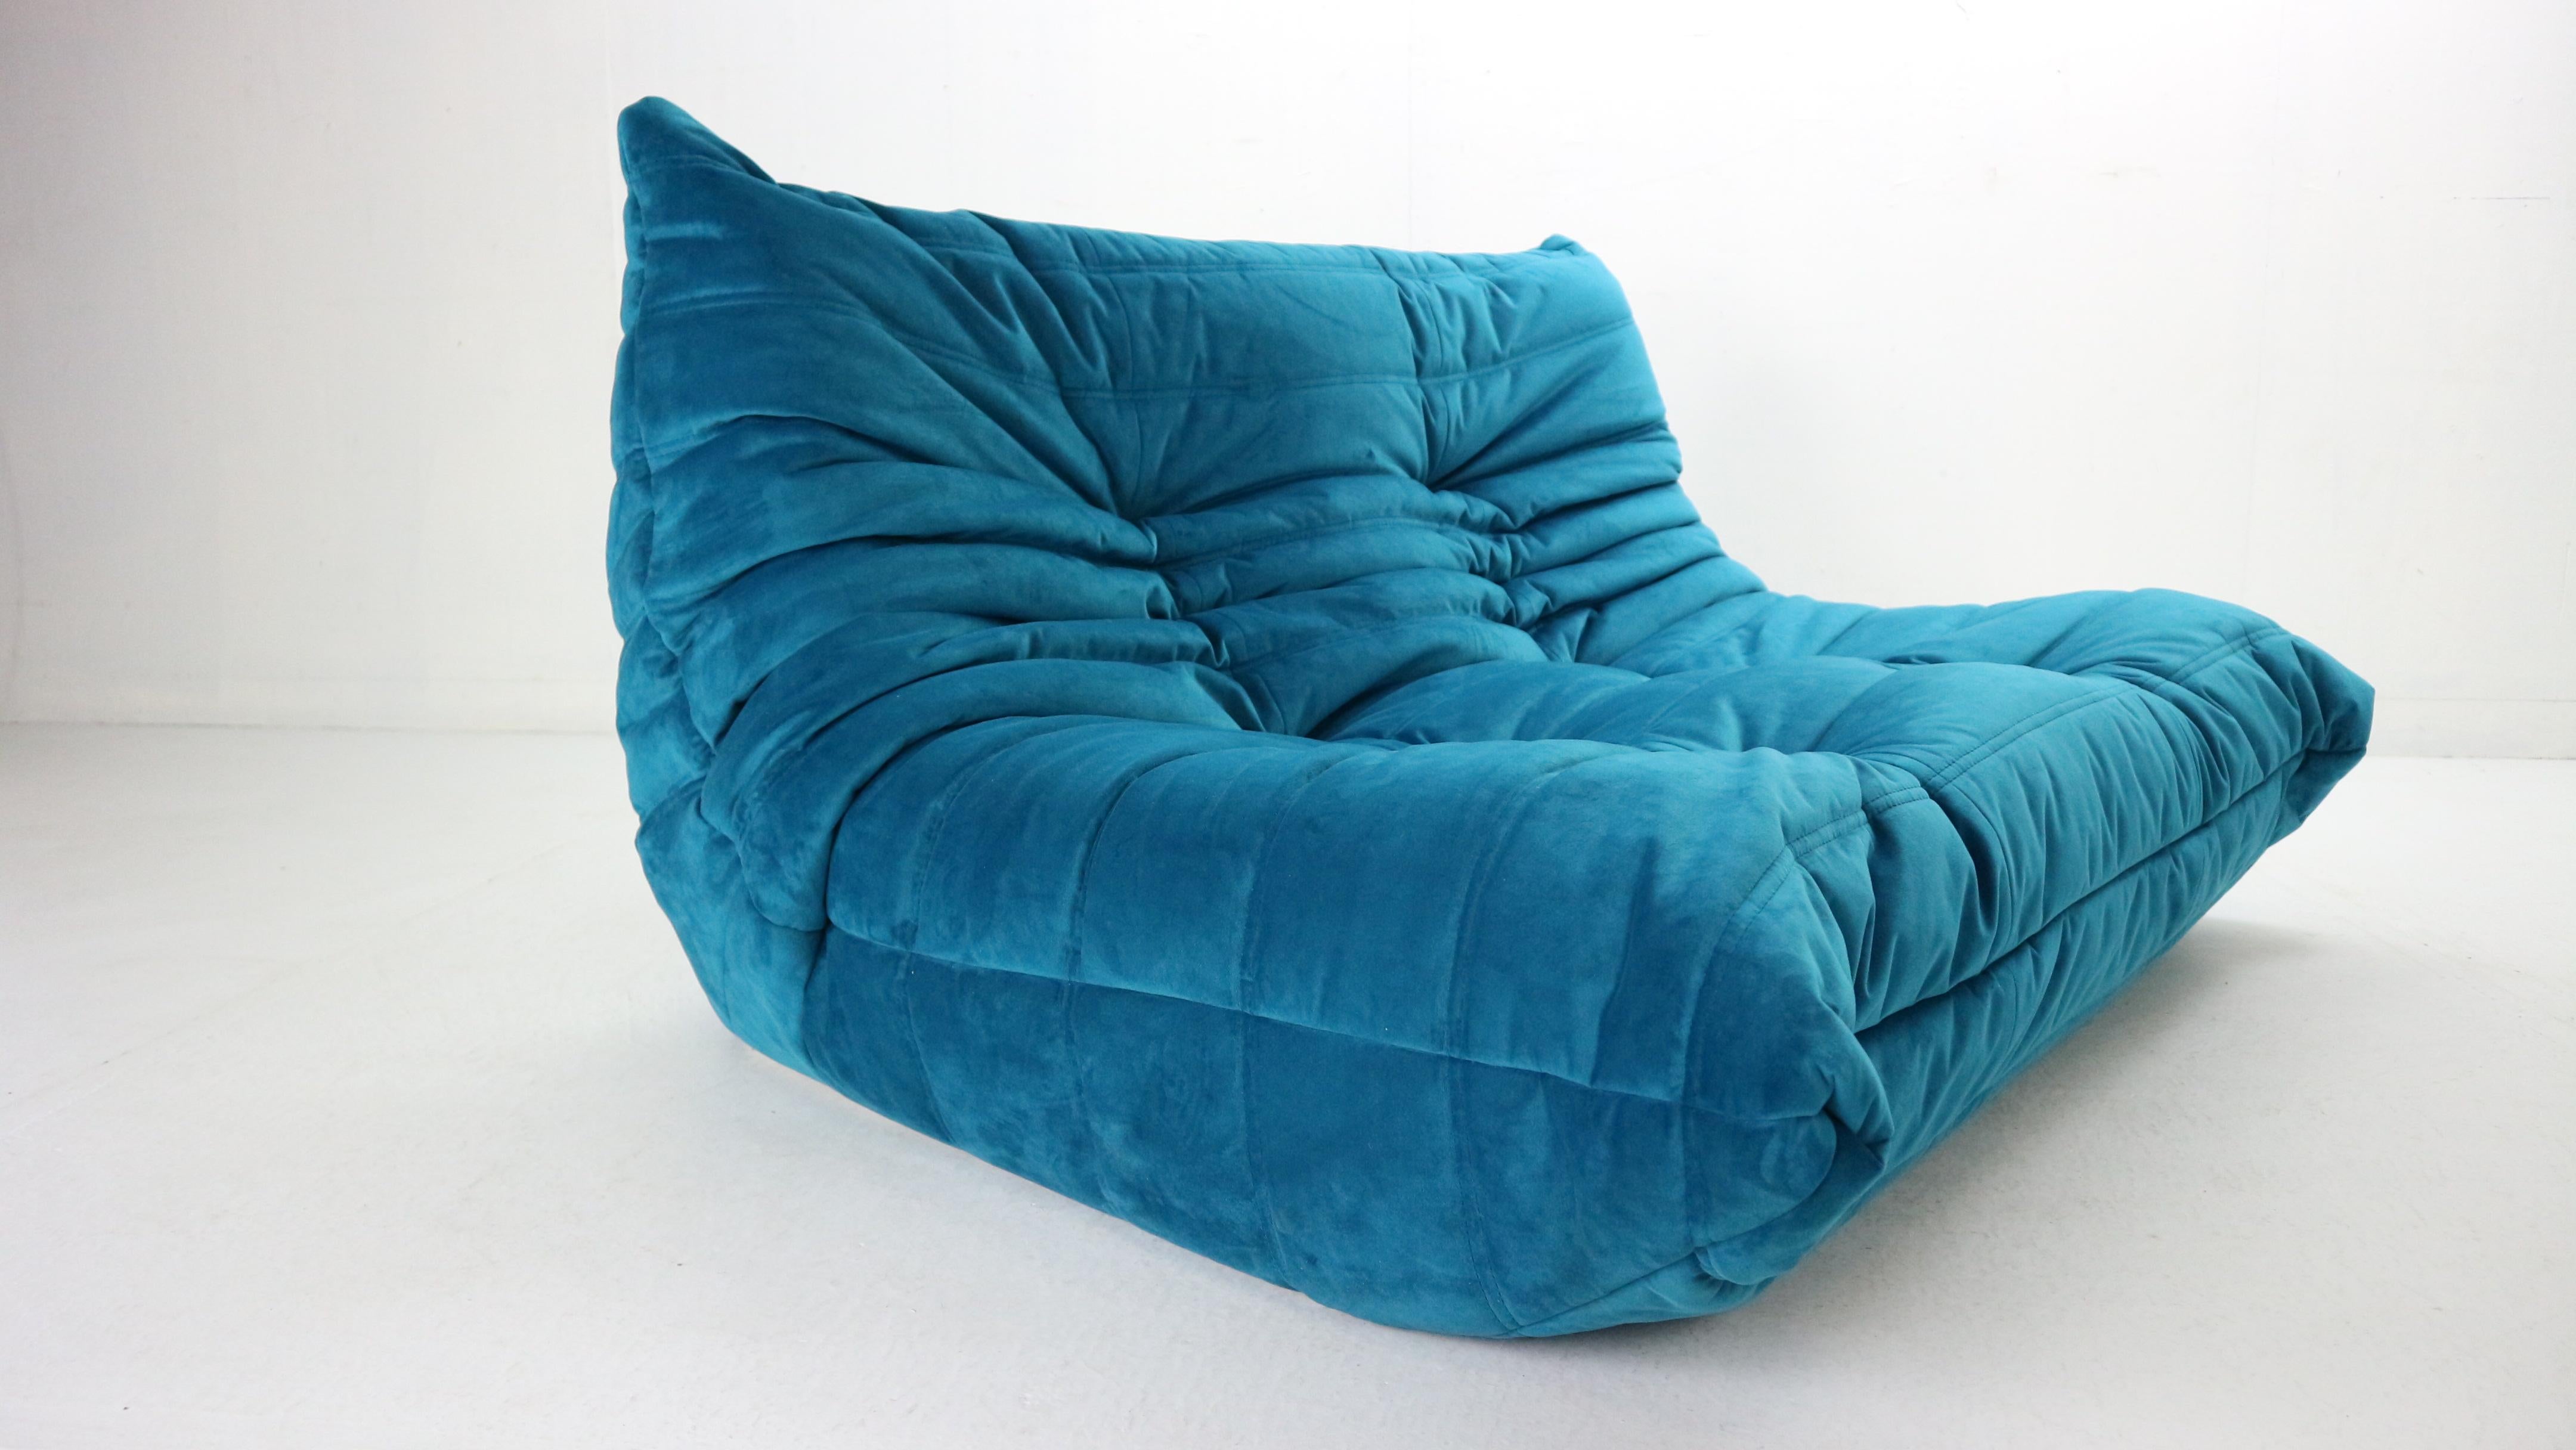 Magnificent Togo two seater lounge sofa designed by Michel Ducaroy in 1973 and was manufactured by Ligne Roset in France.
Very comfortable and beautiful accent to your living room space.
It has been newly reupholstered in a blue soft velvet